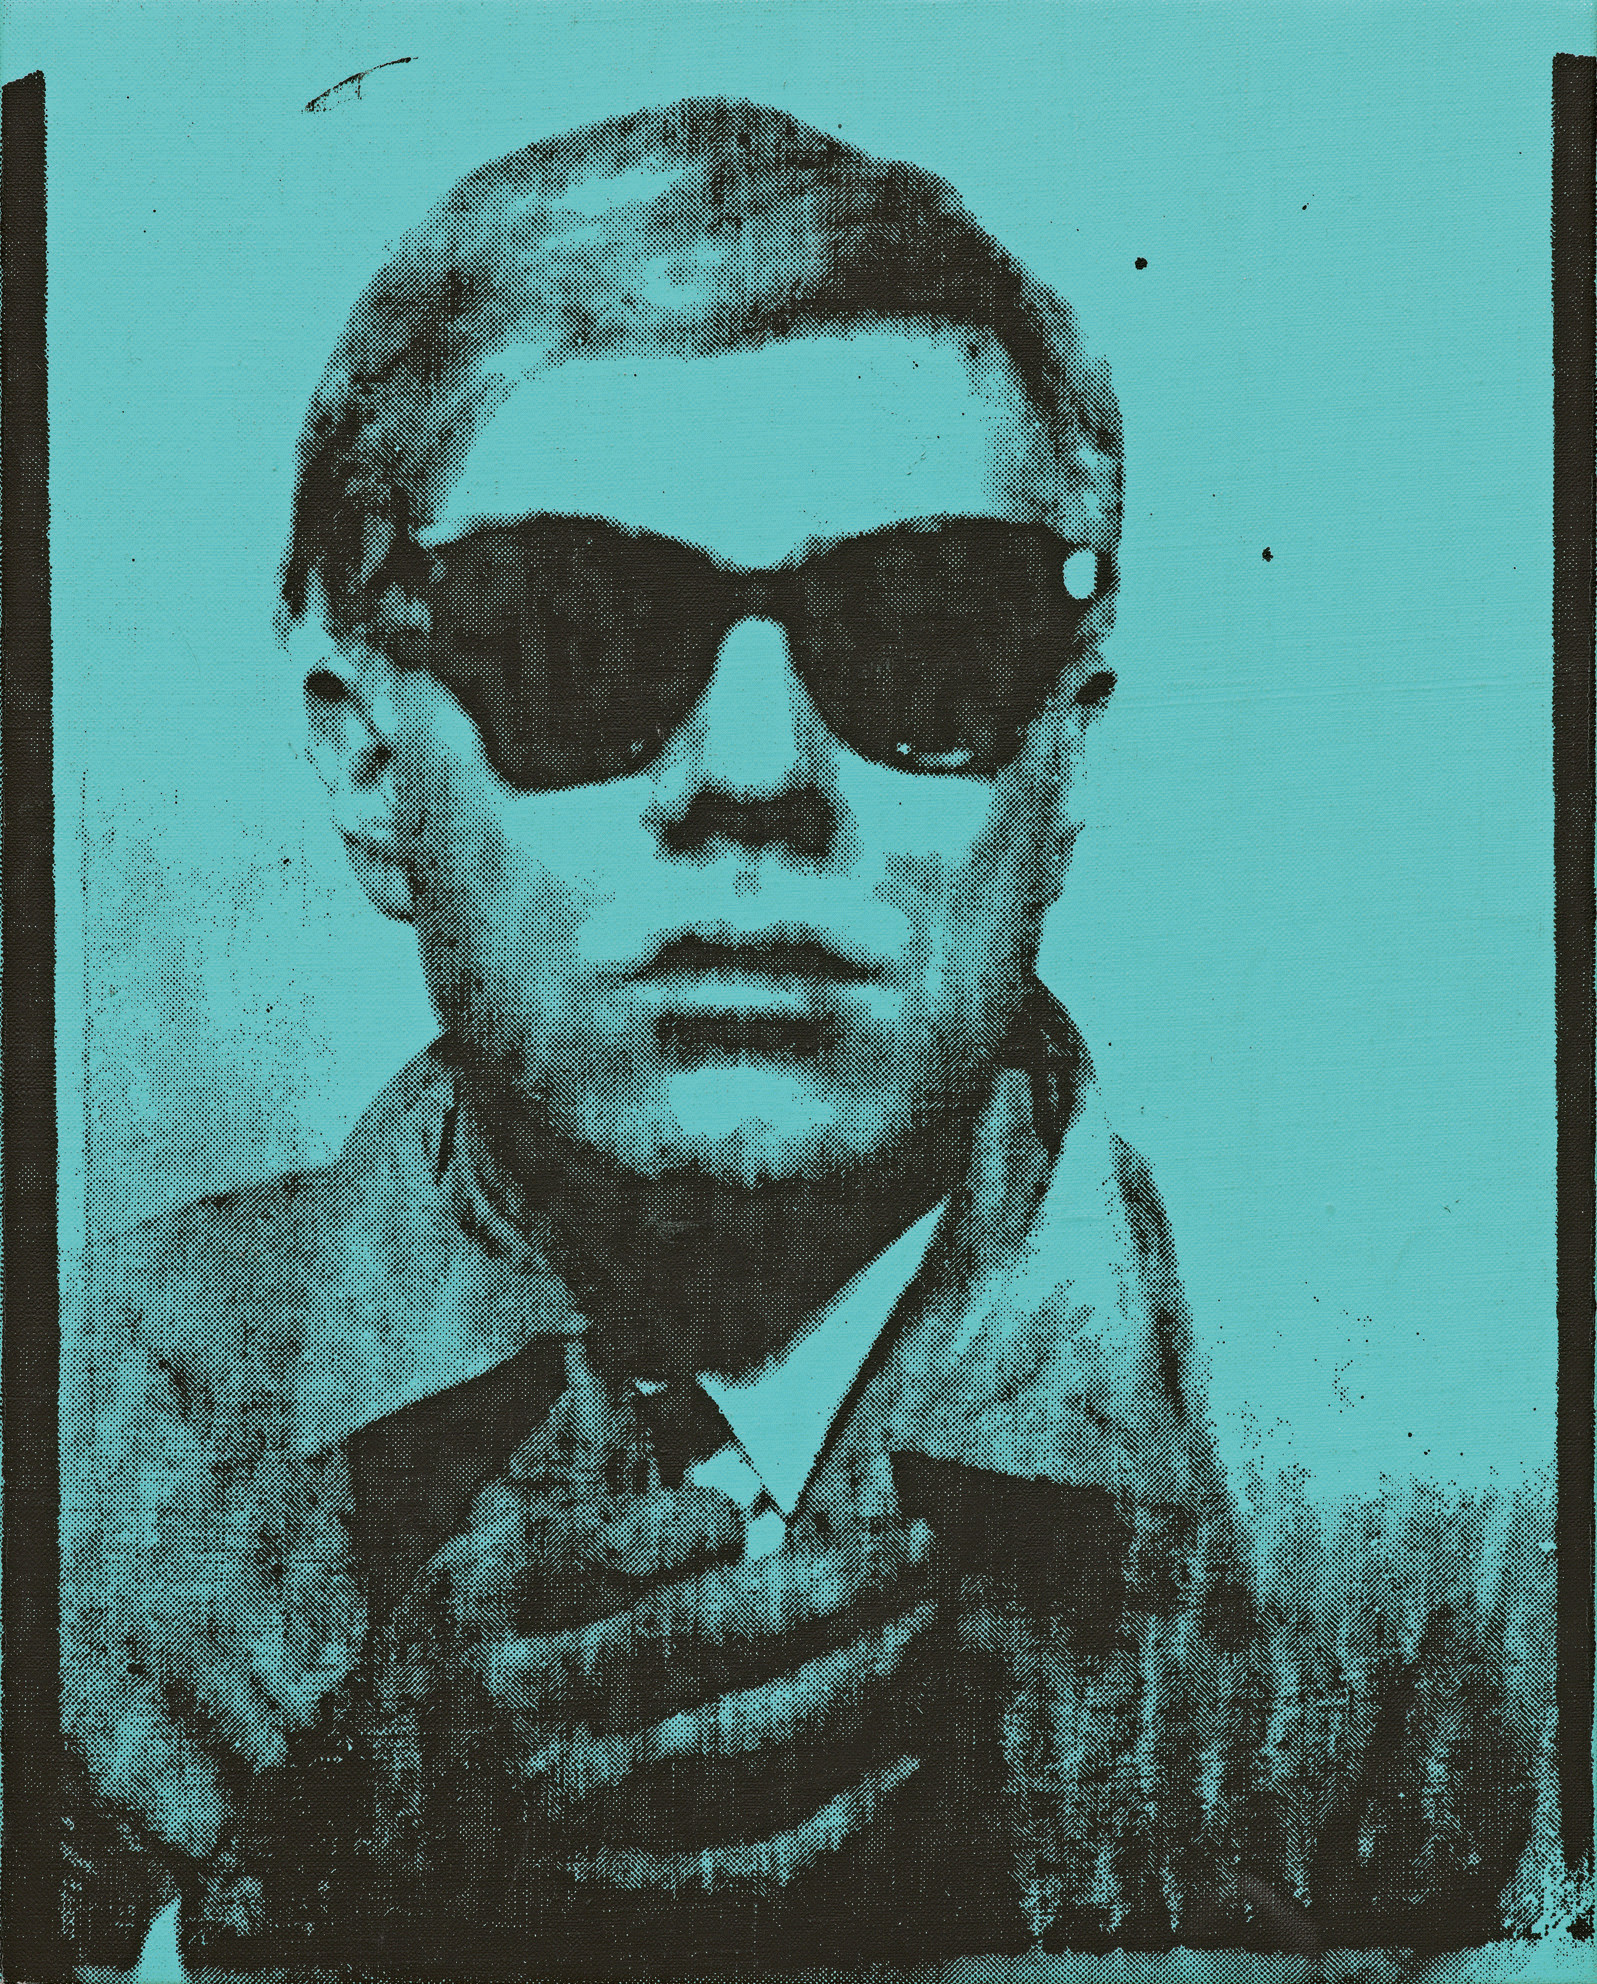 1597x1984 Andy Warhol Pop Art Self-Portrait to Appear at Sotheby's Auction